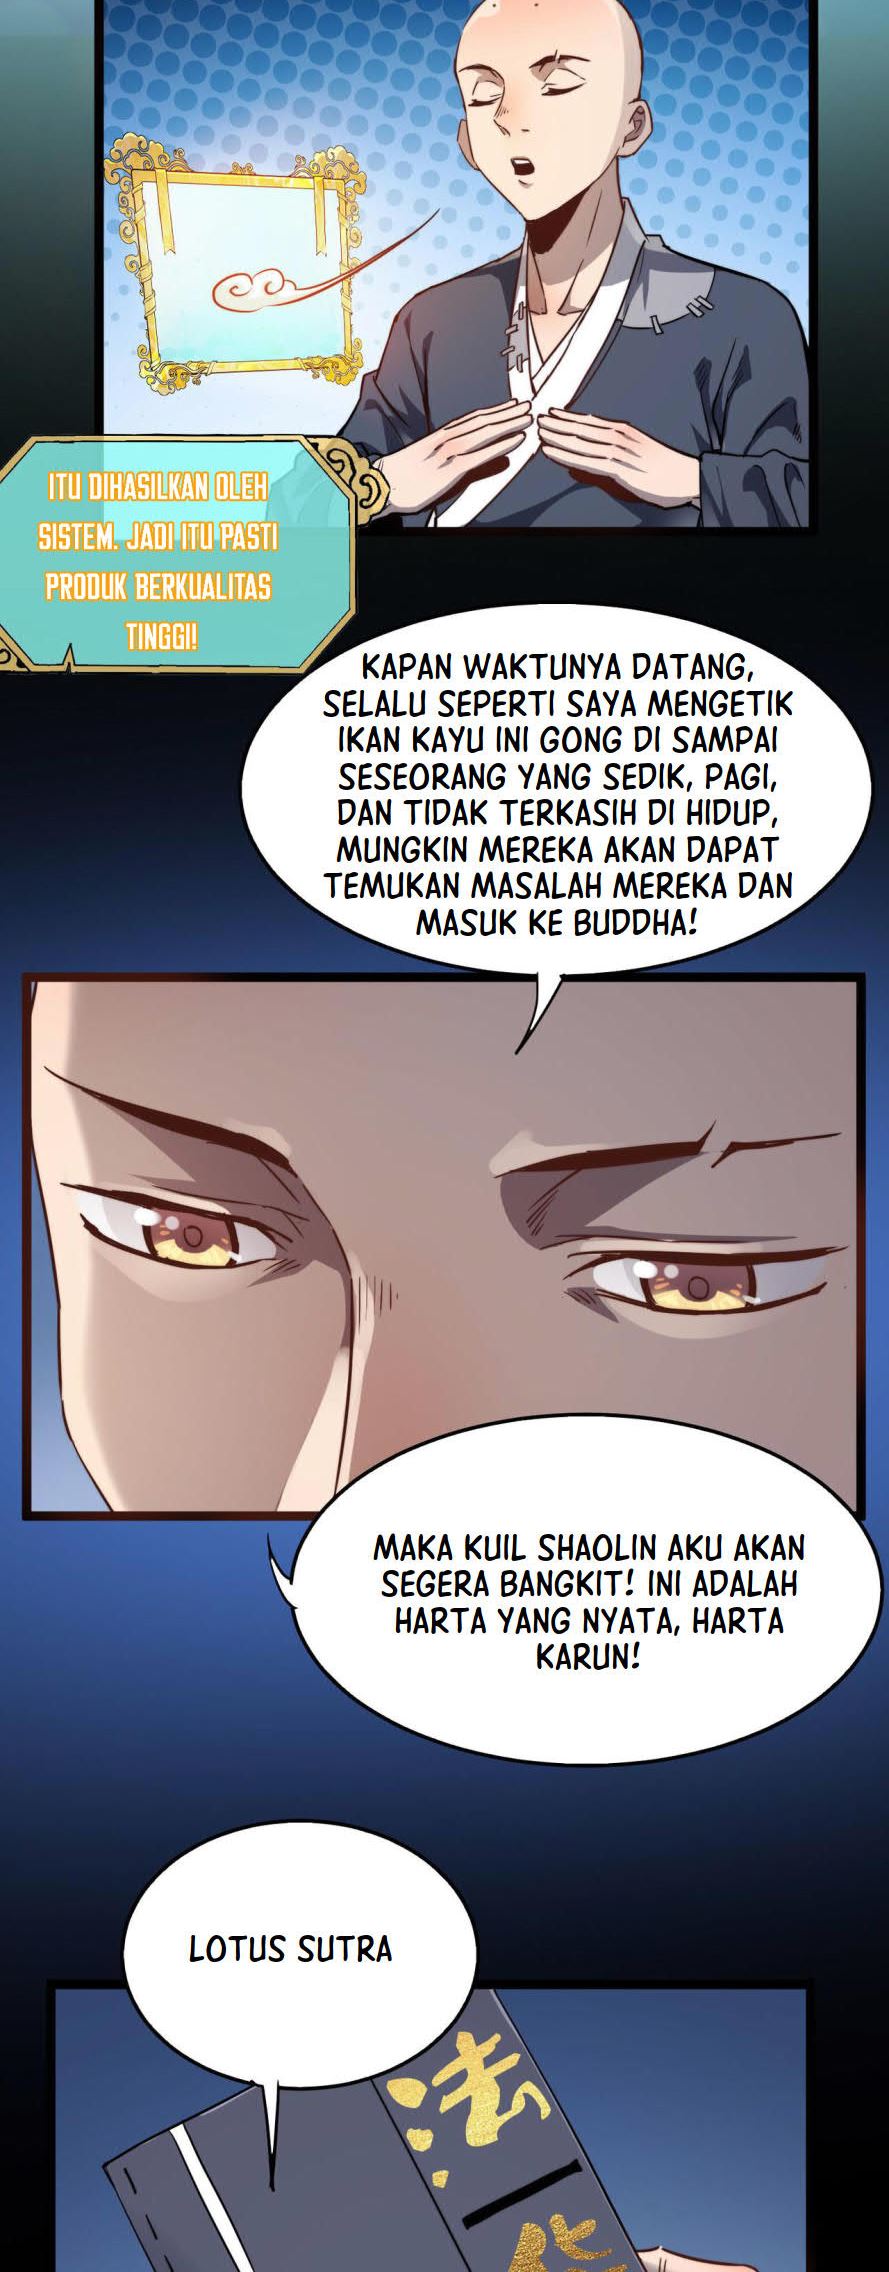 Dilarang COPAS - situs resmi www.mangacanblog.com - Komik building the strongest shaolin temple in another world 007 - chapter 7 8 Indonesia building the strongest shaolin temple in another world 007 - chapter 7 Terbaru 23|Baca Manga Komik Indonesia|Mangacan